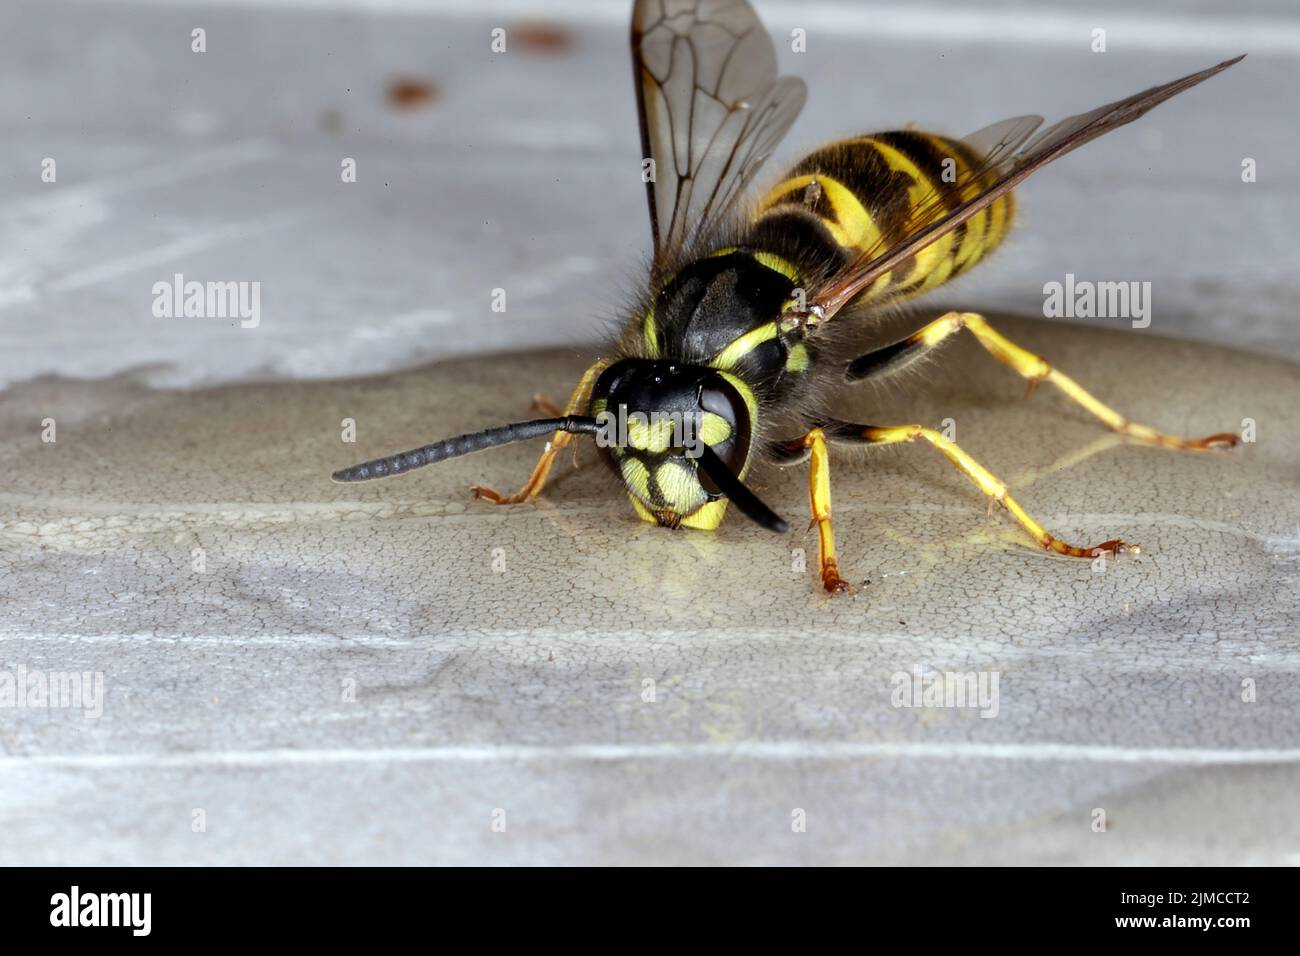 Wasp, Insect, Vespinae, Thuringia, Germany, Europe Stock Photo